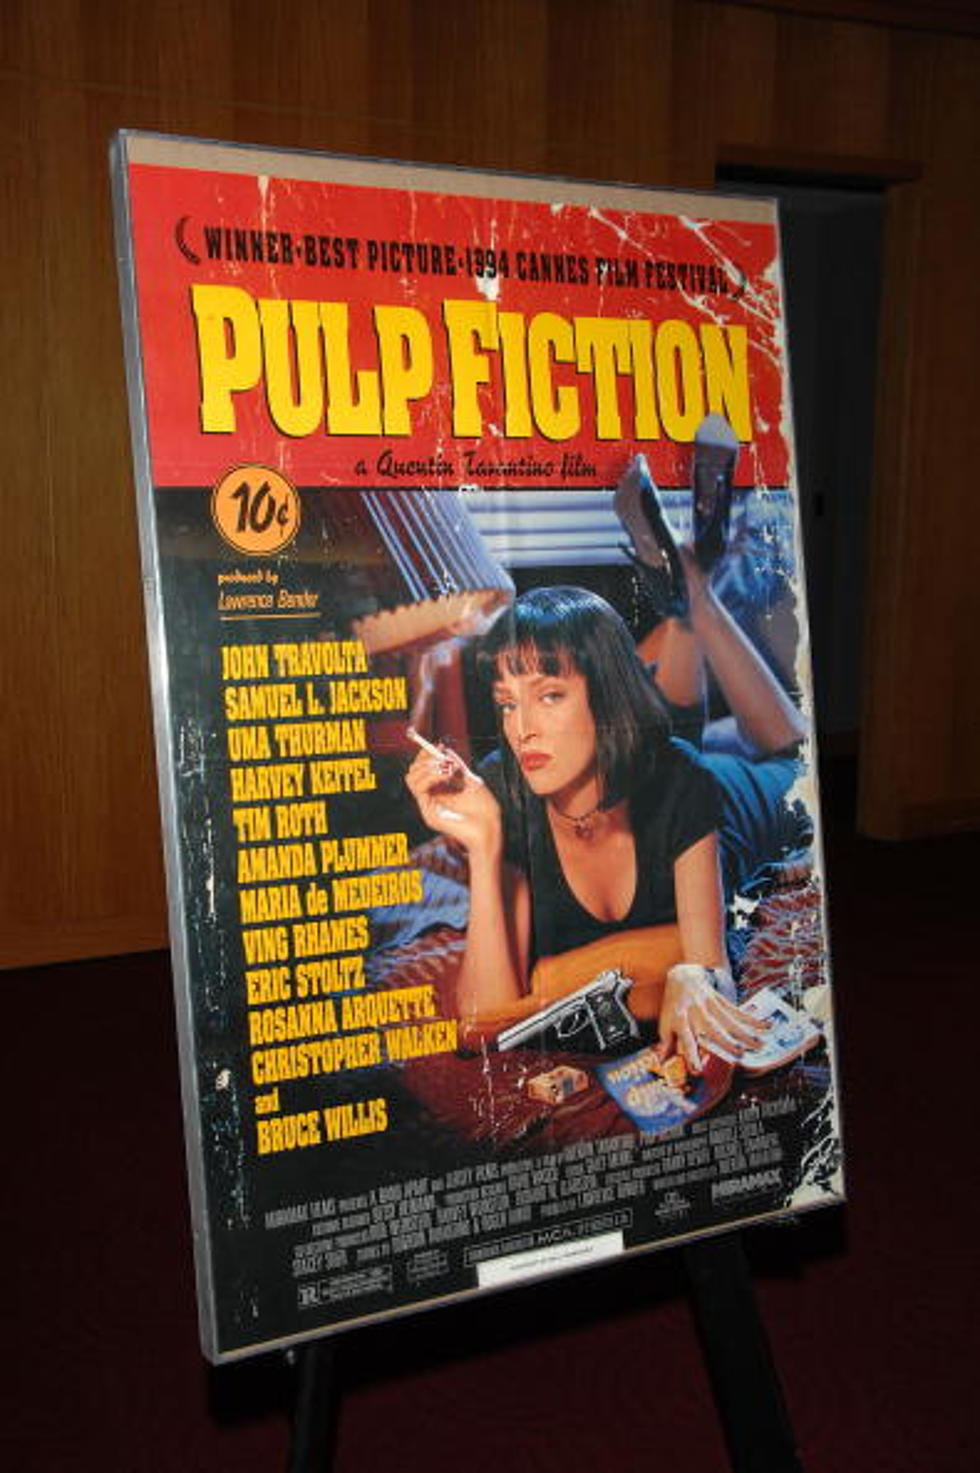 Celebrating the 20th Anniversary of “Pulp Fiction”